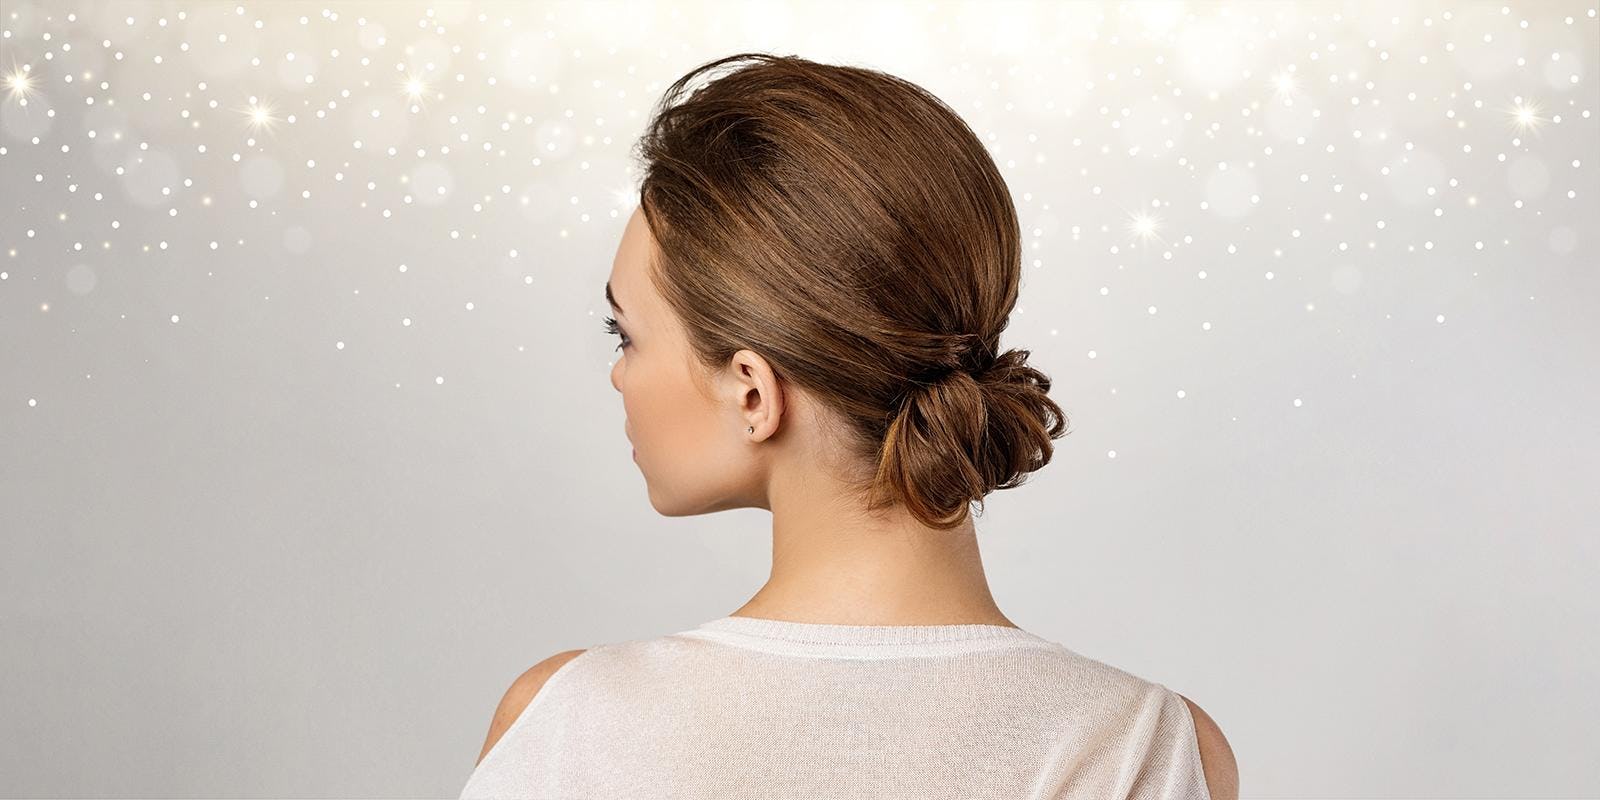 Woman with brown hair and low bun updo